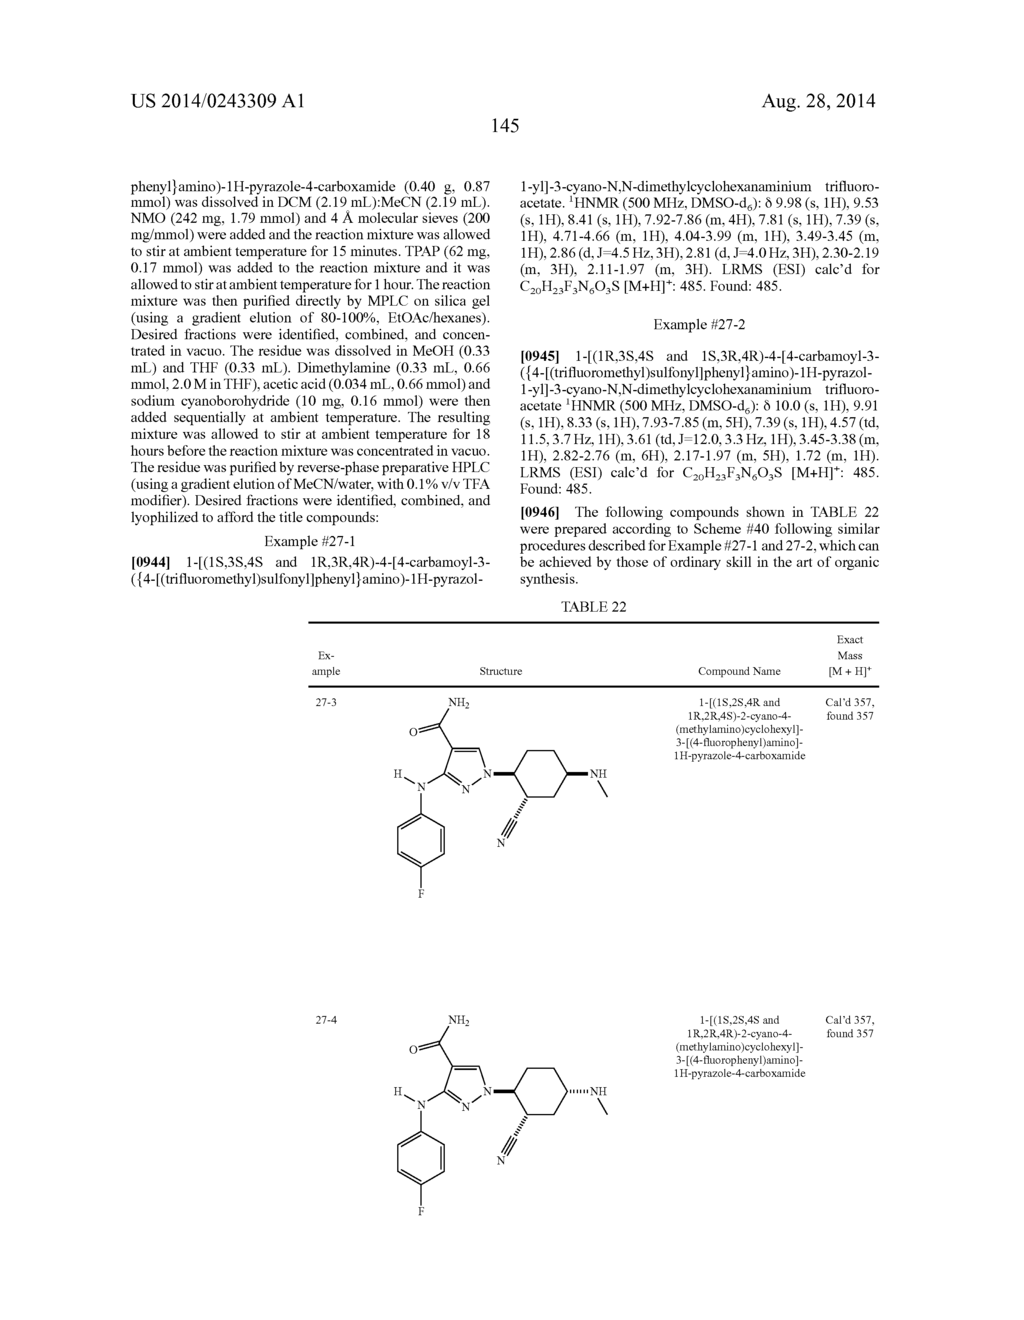 CYCLOALKYLNITRILE PYRAZOLE CARBOXAMIDES AS JANUS KINASE INHIBITORS - diagram, schematic, and image 146